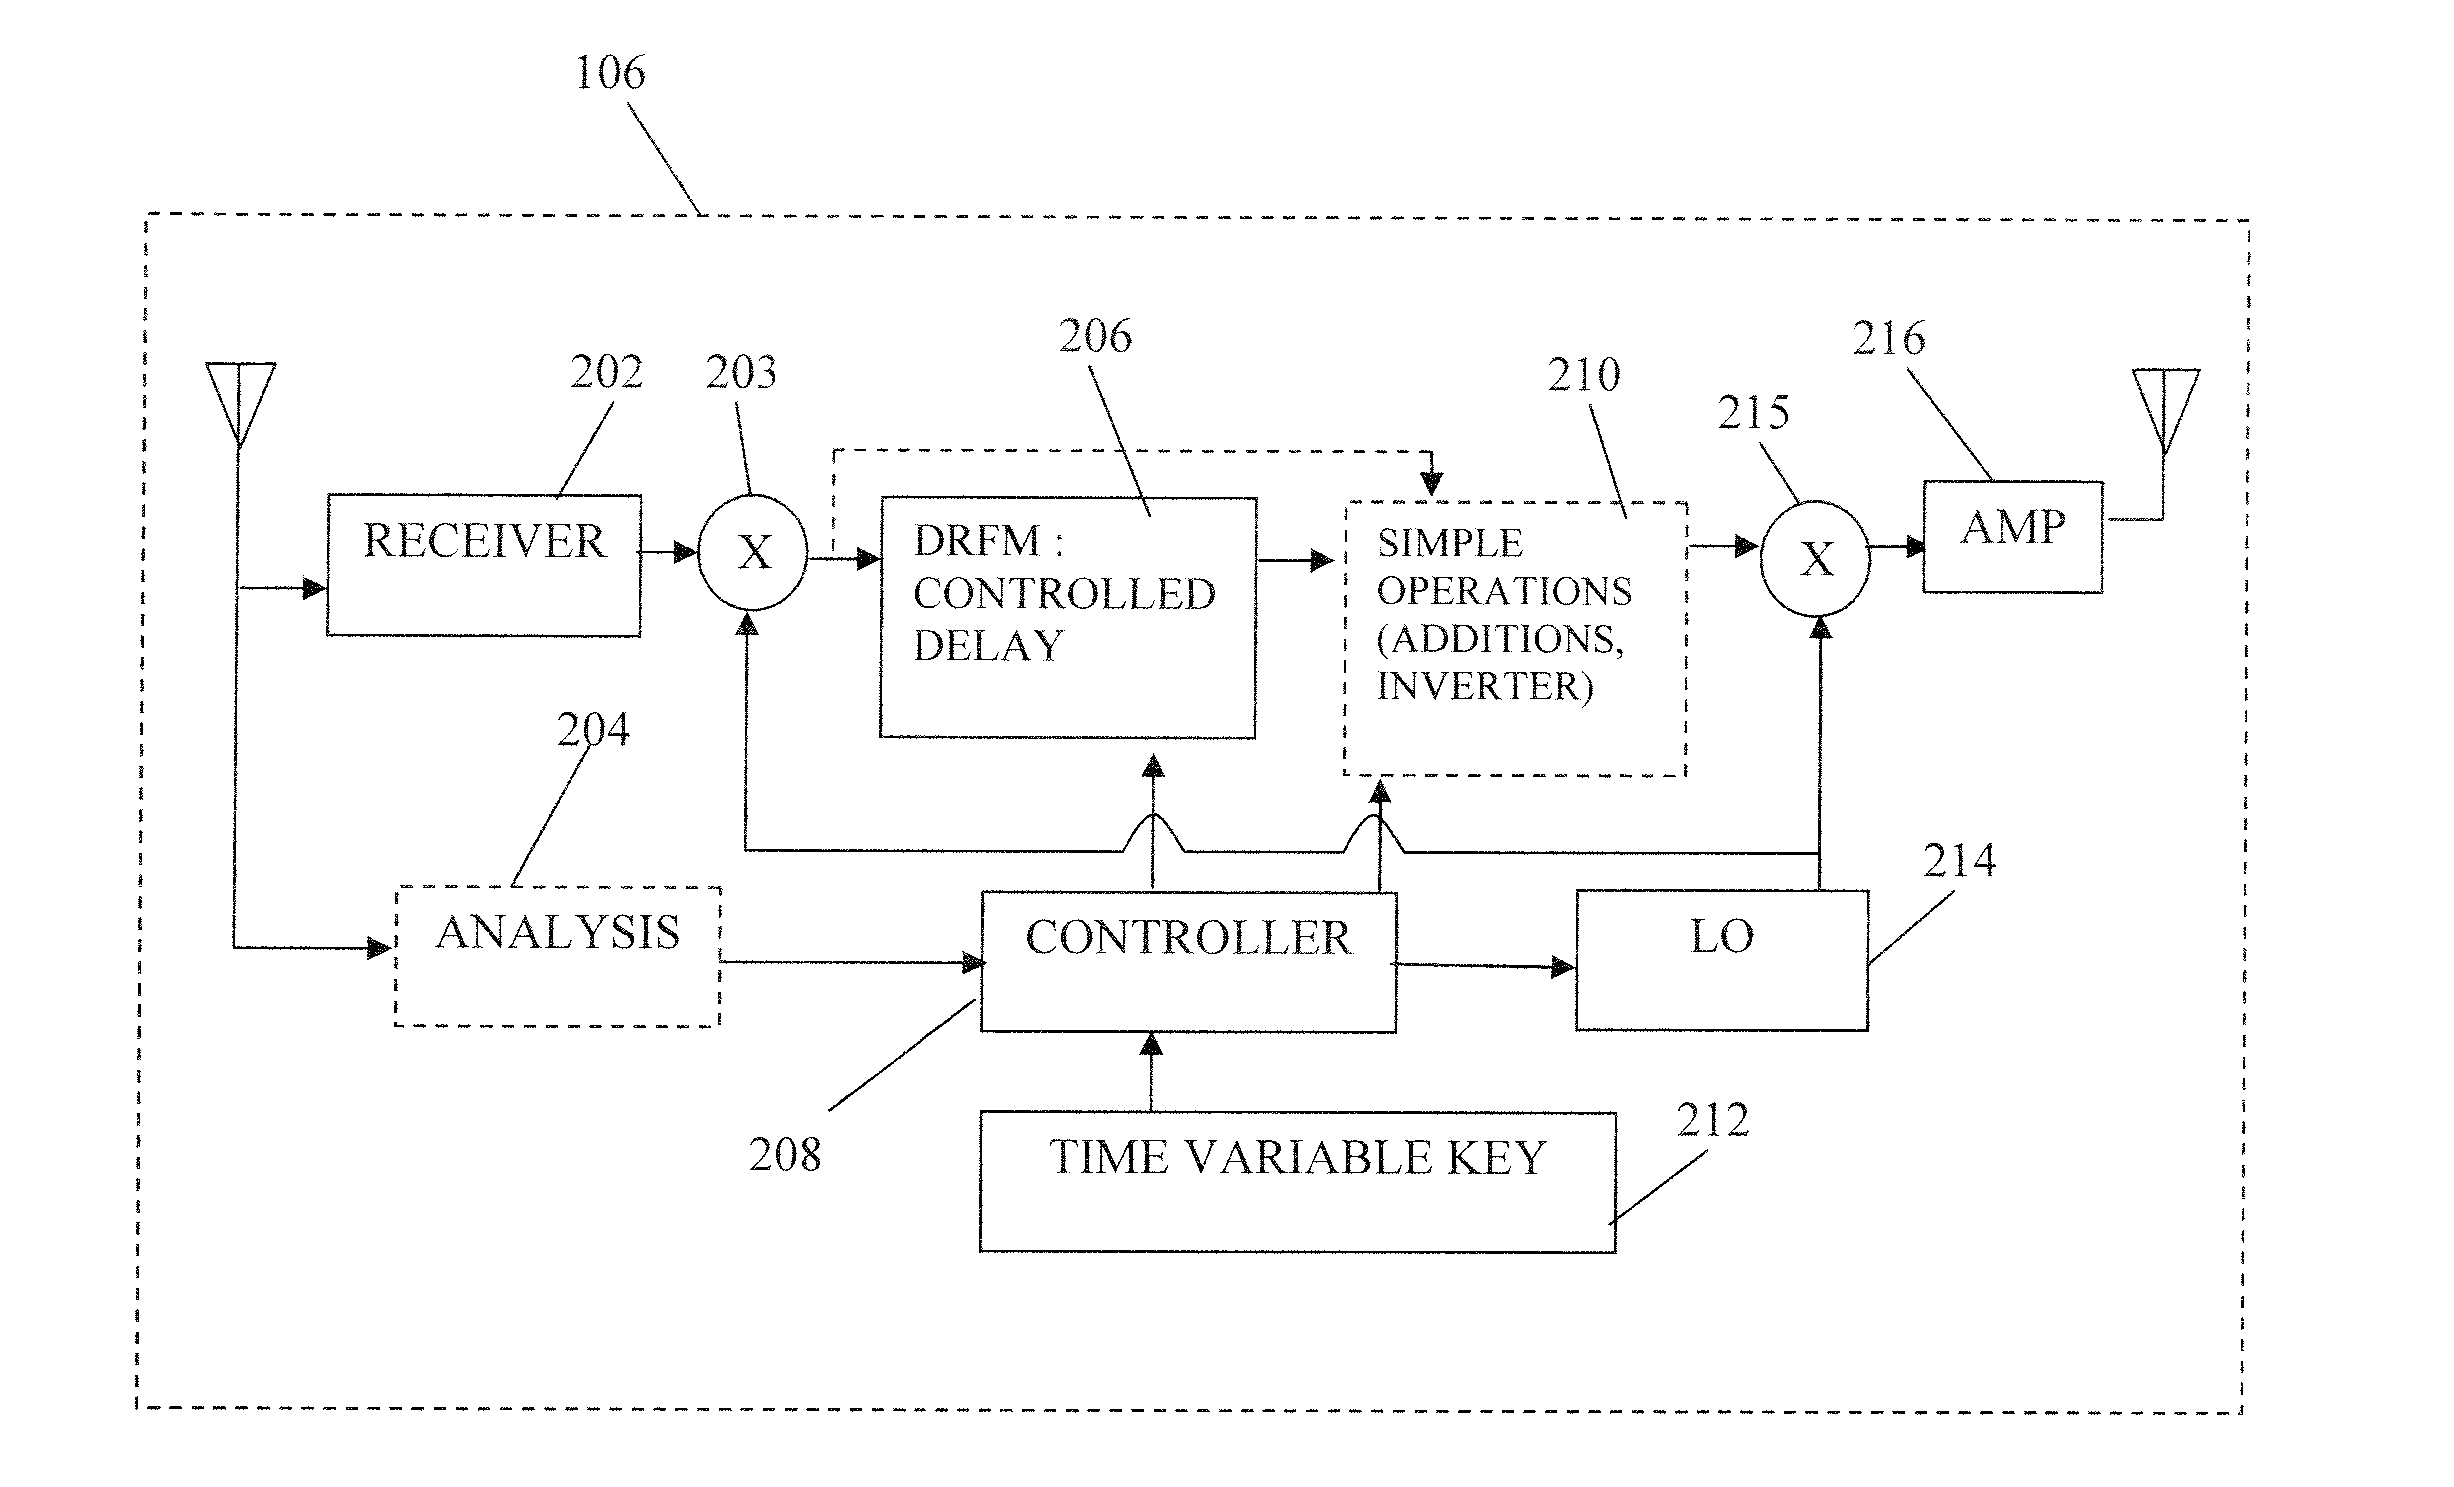 Simultaneous communications jamming and enabling on a same frequency band